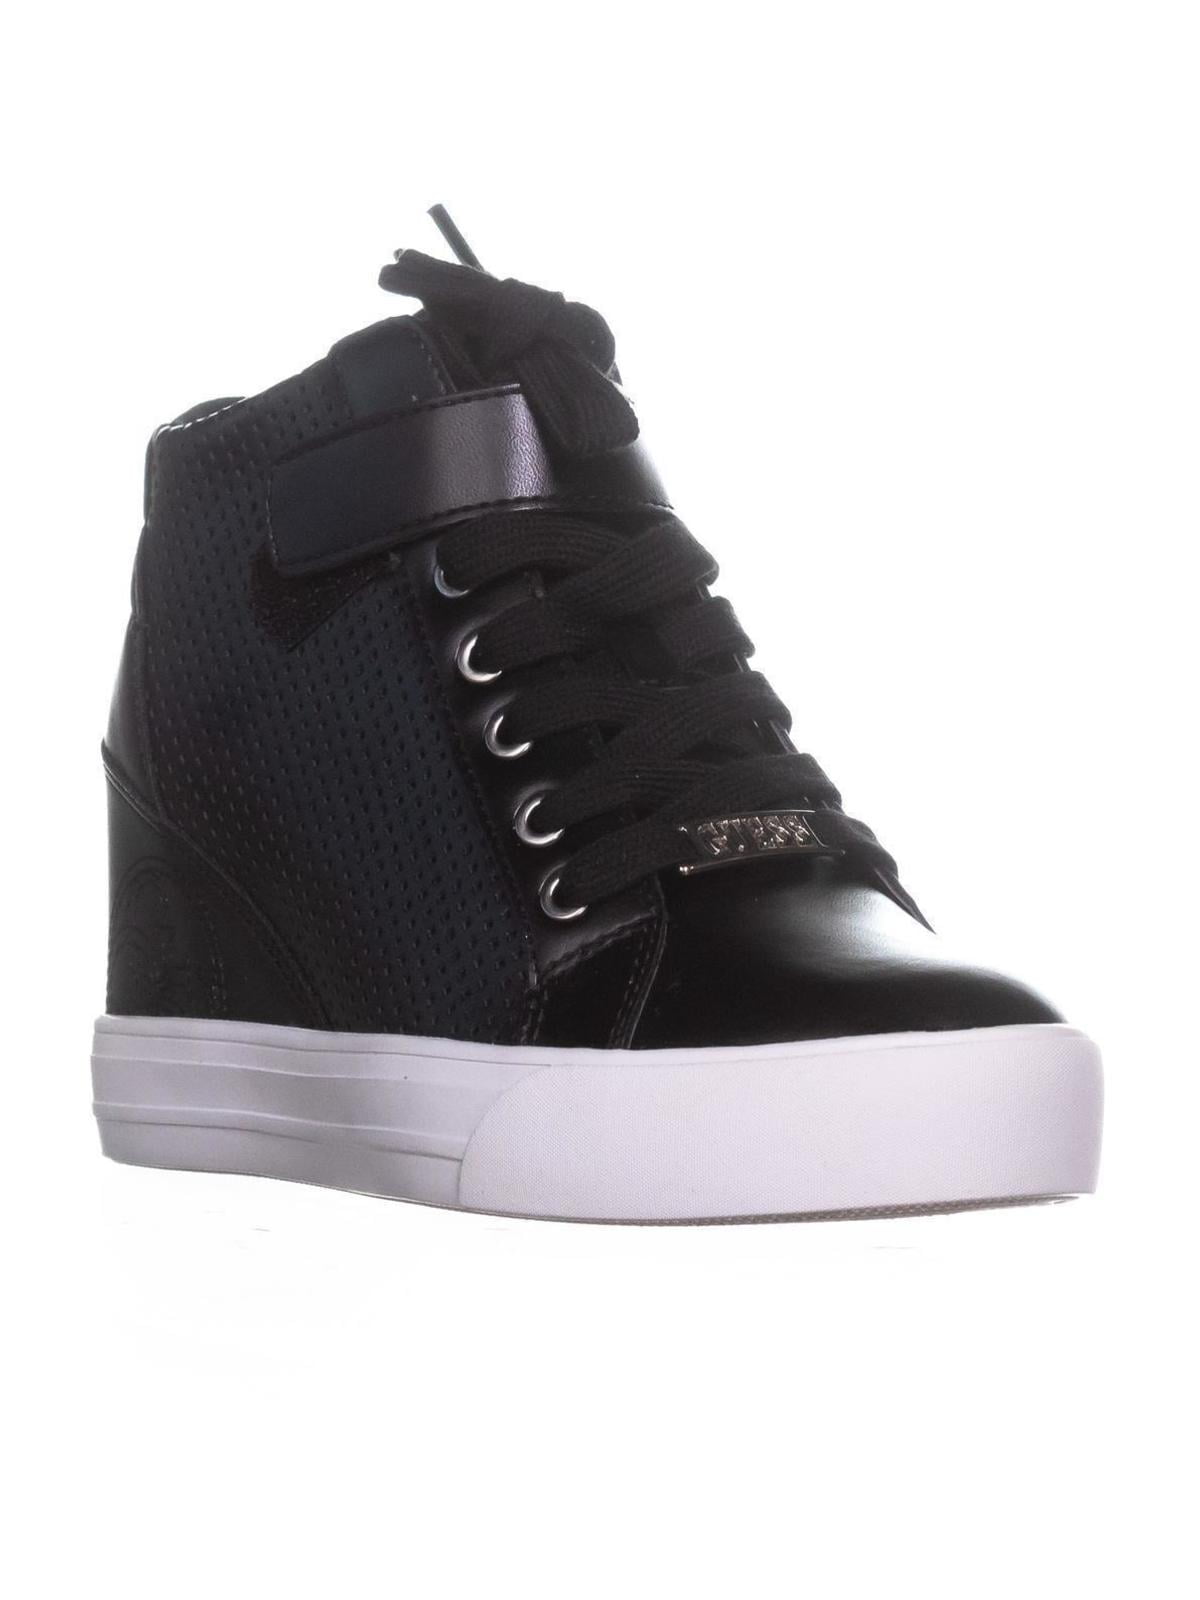 Womens Guess Decia2 Lace Up Wedge Sneakers, Black - Walmart.com